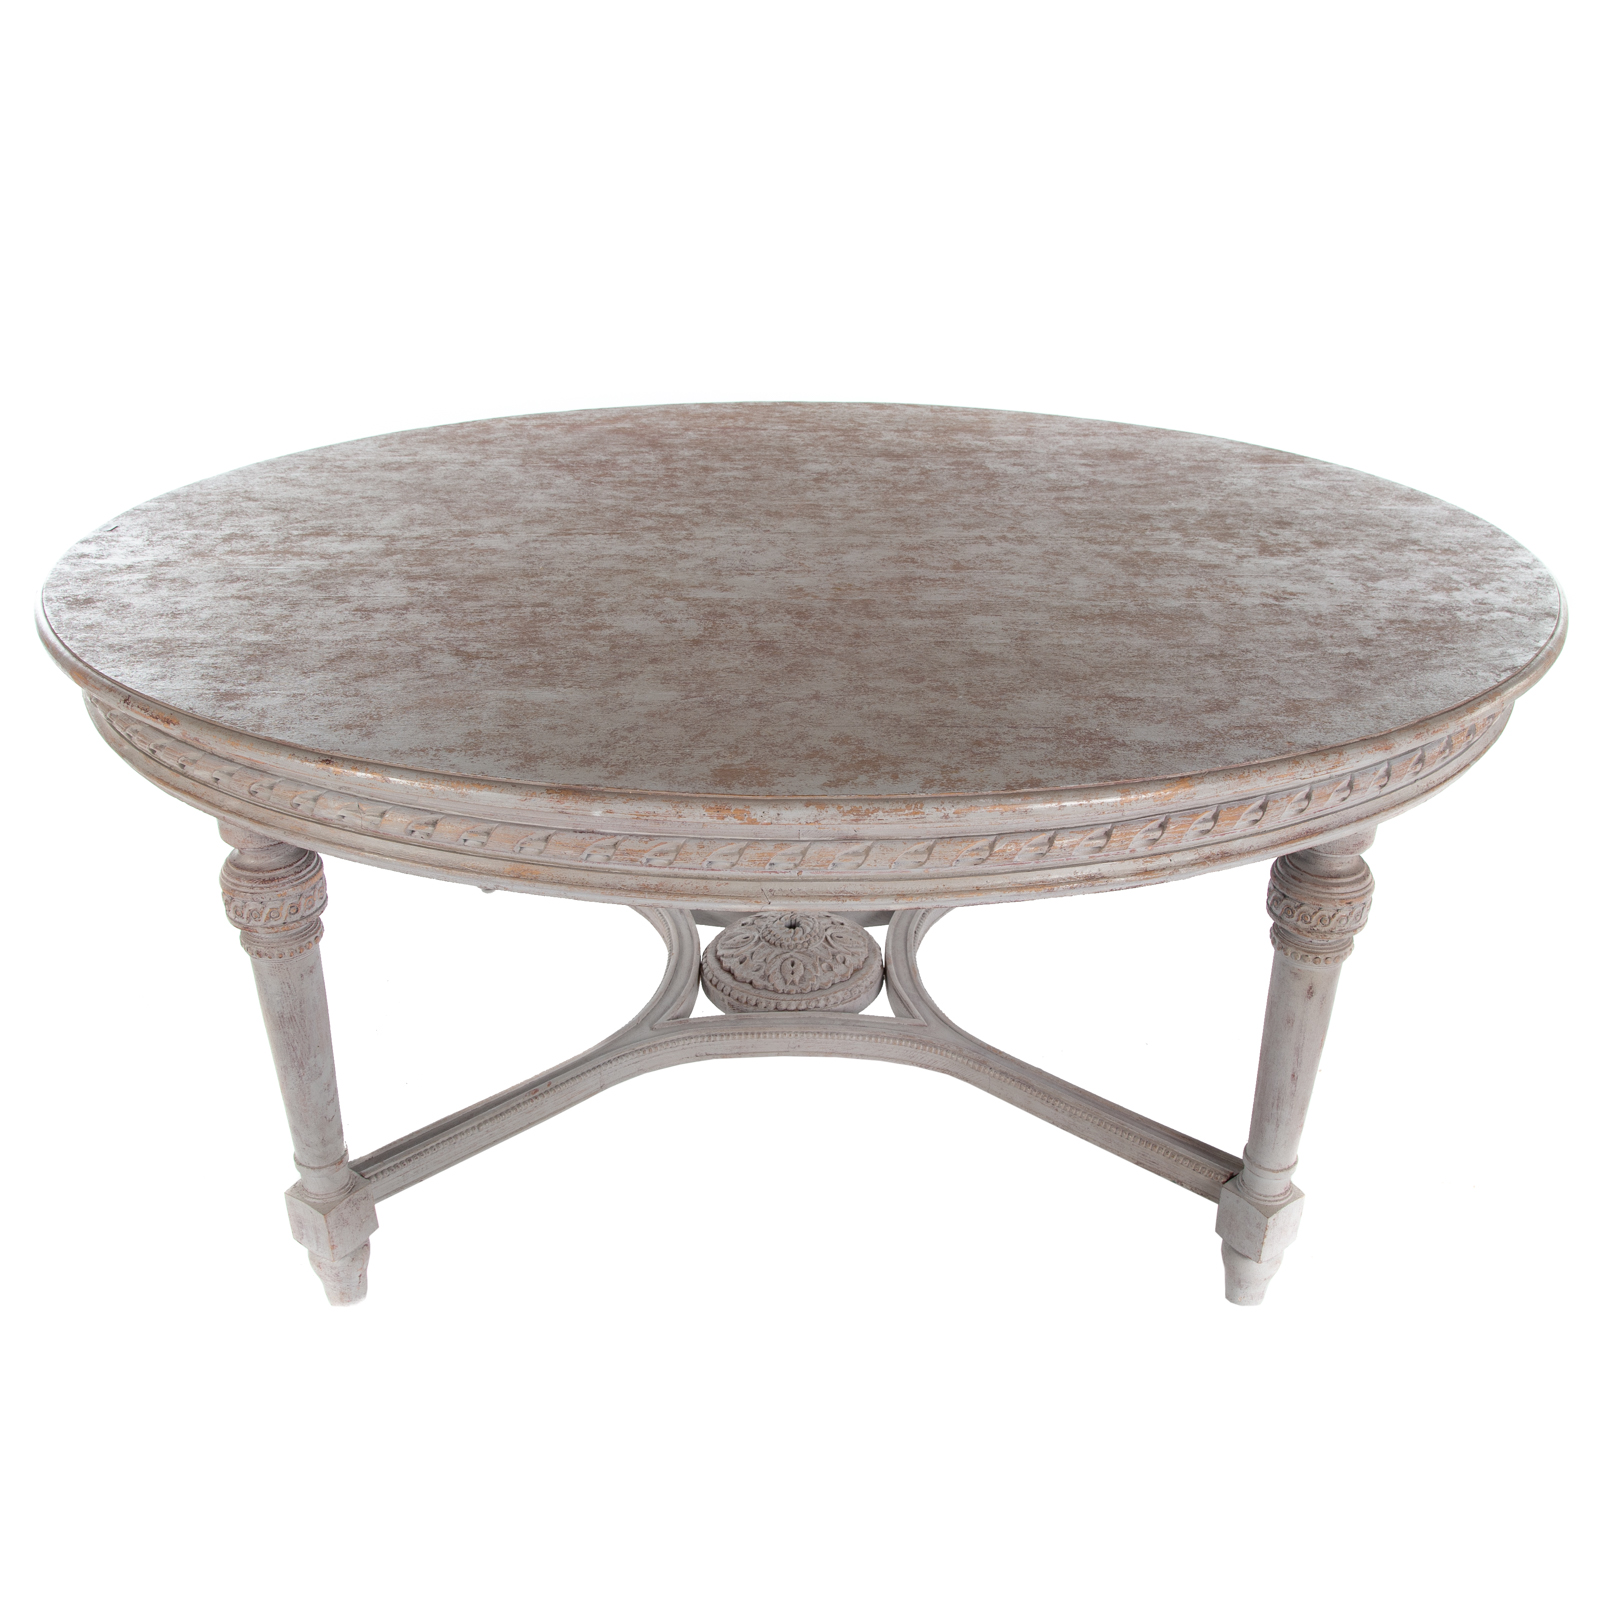 LOUIS XVI STYLE OVAL DINING TABLE 3cae05